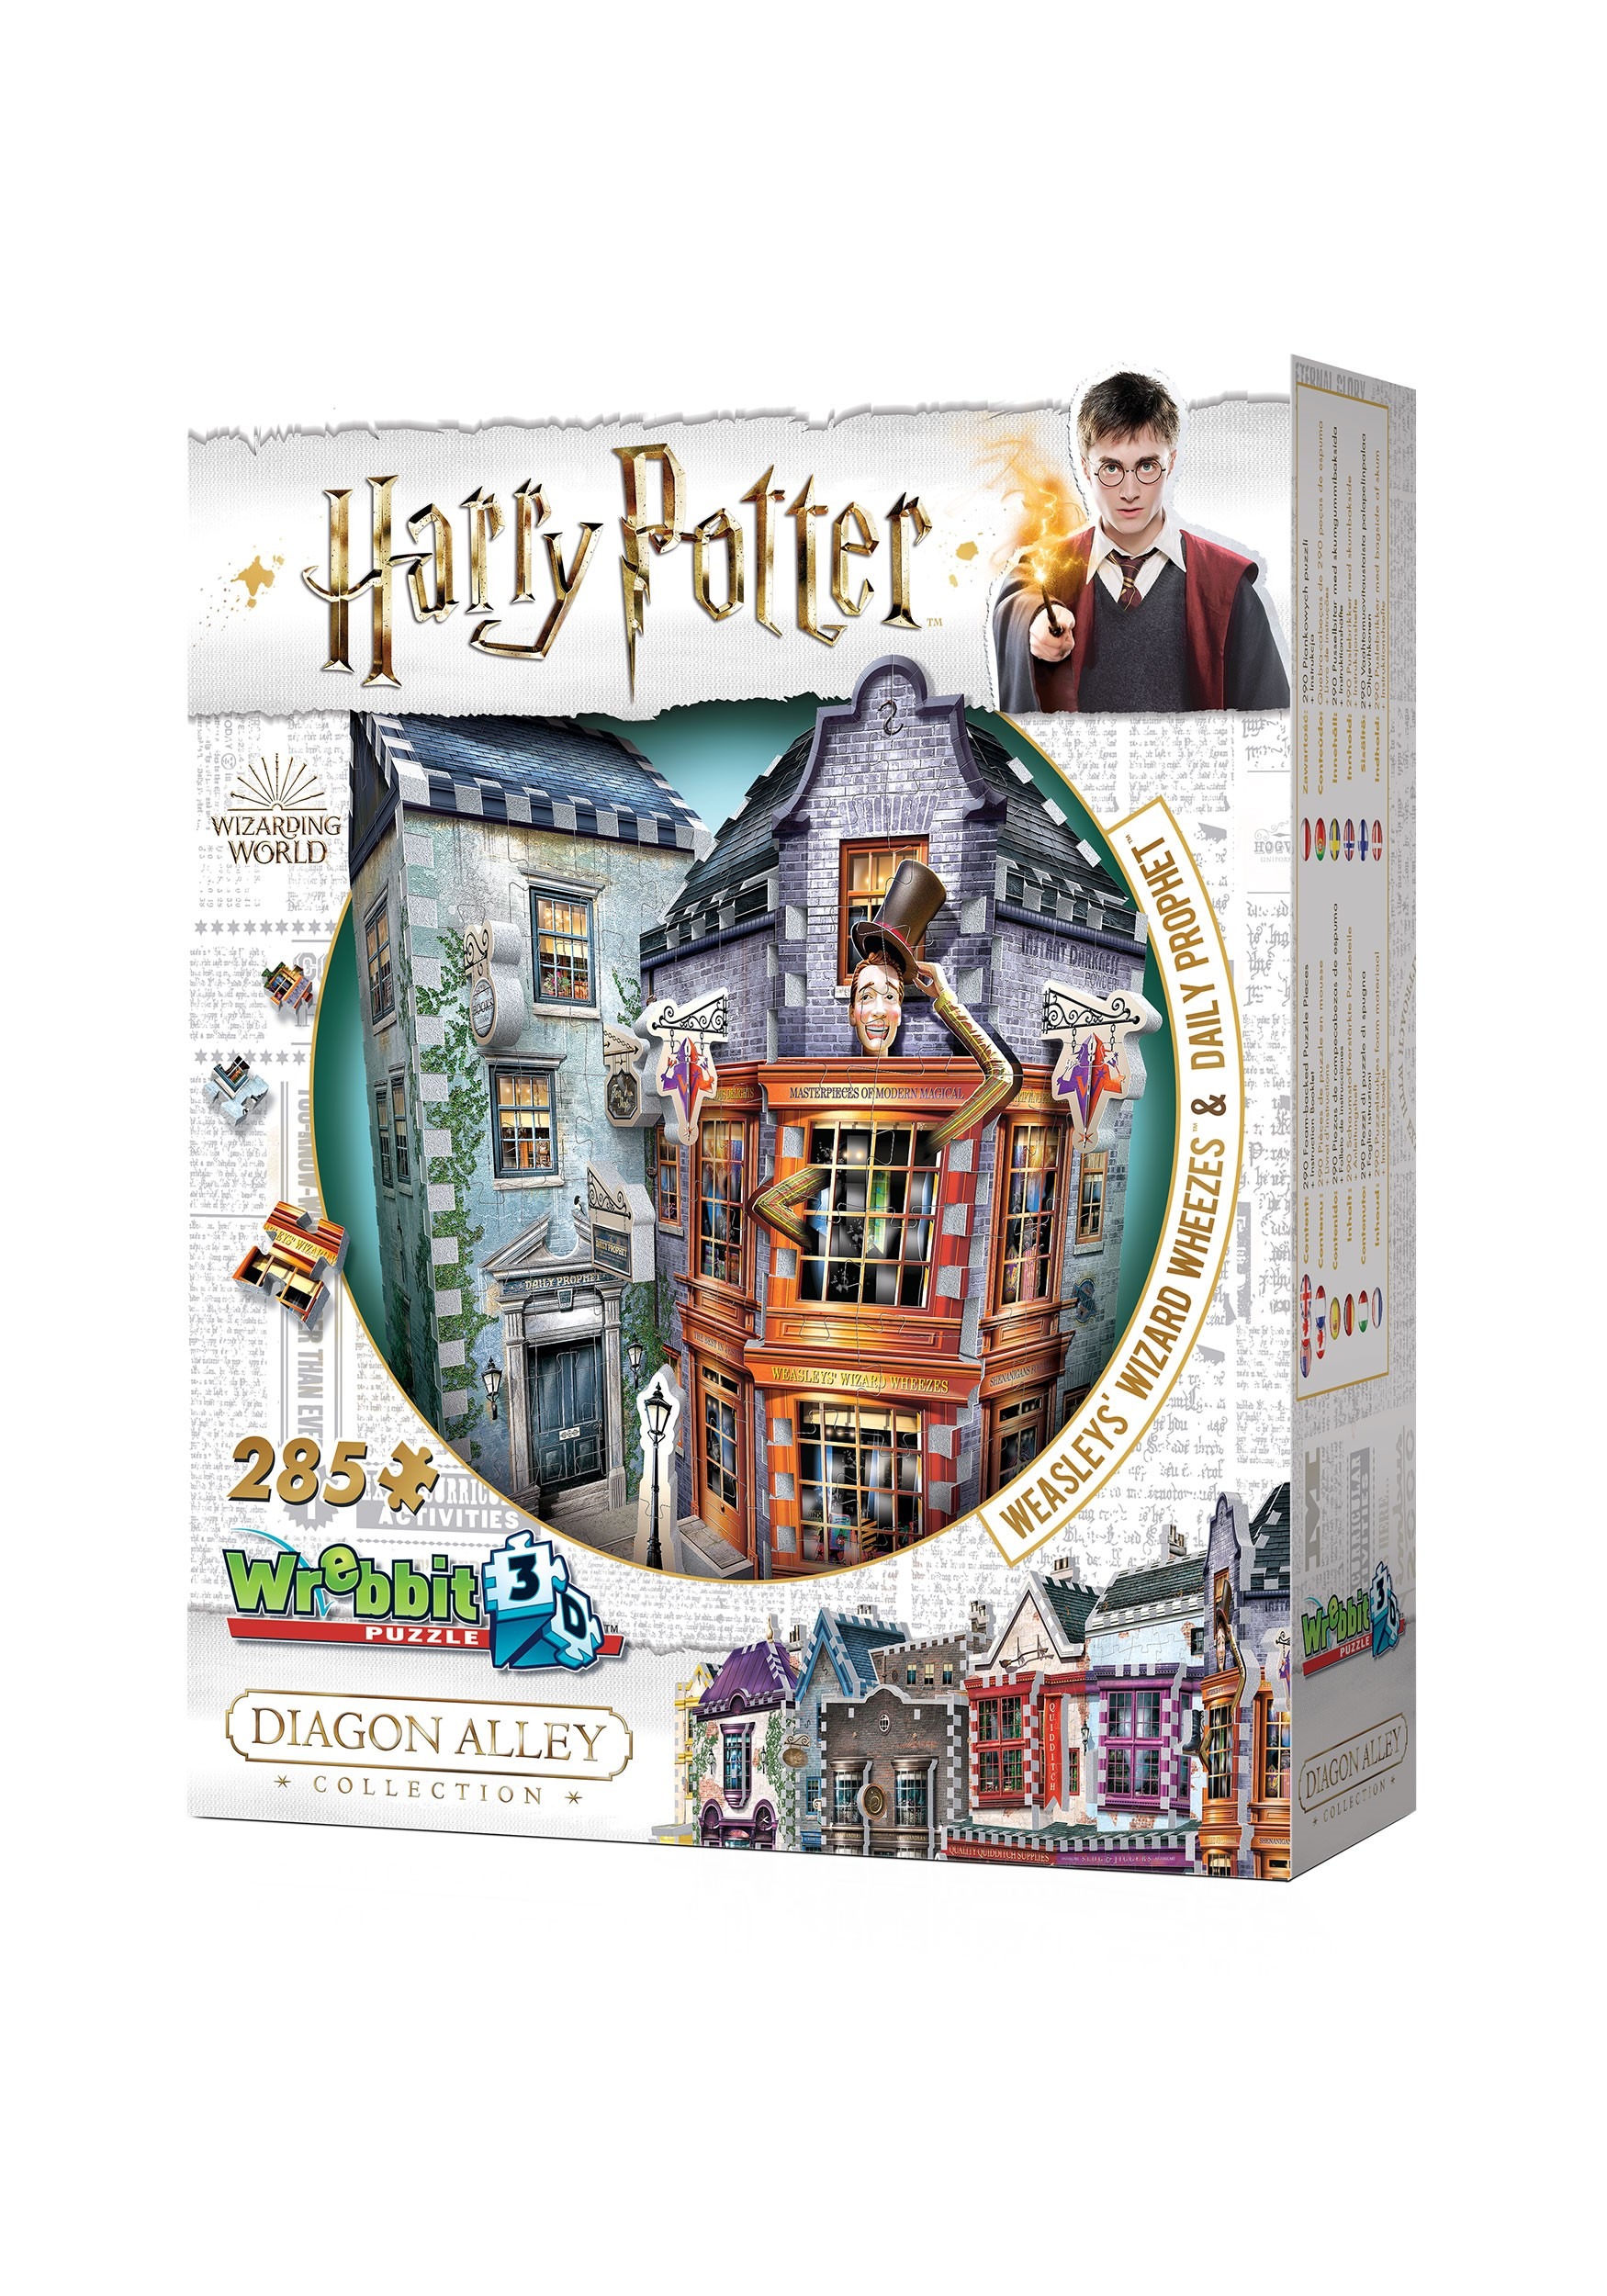 Diagon Alley Collection- Harry Potter Weasleys Wizard Wheezes Puzzle